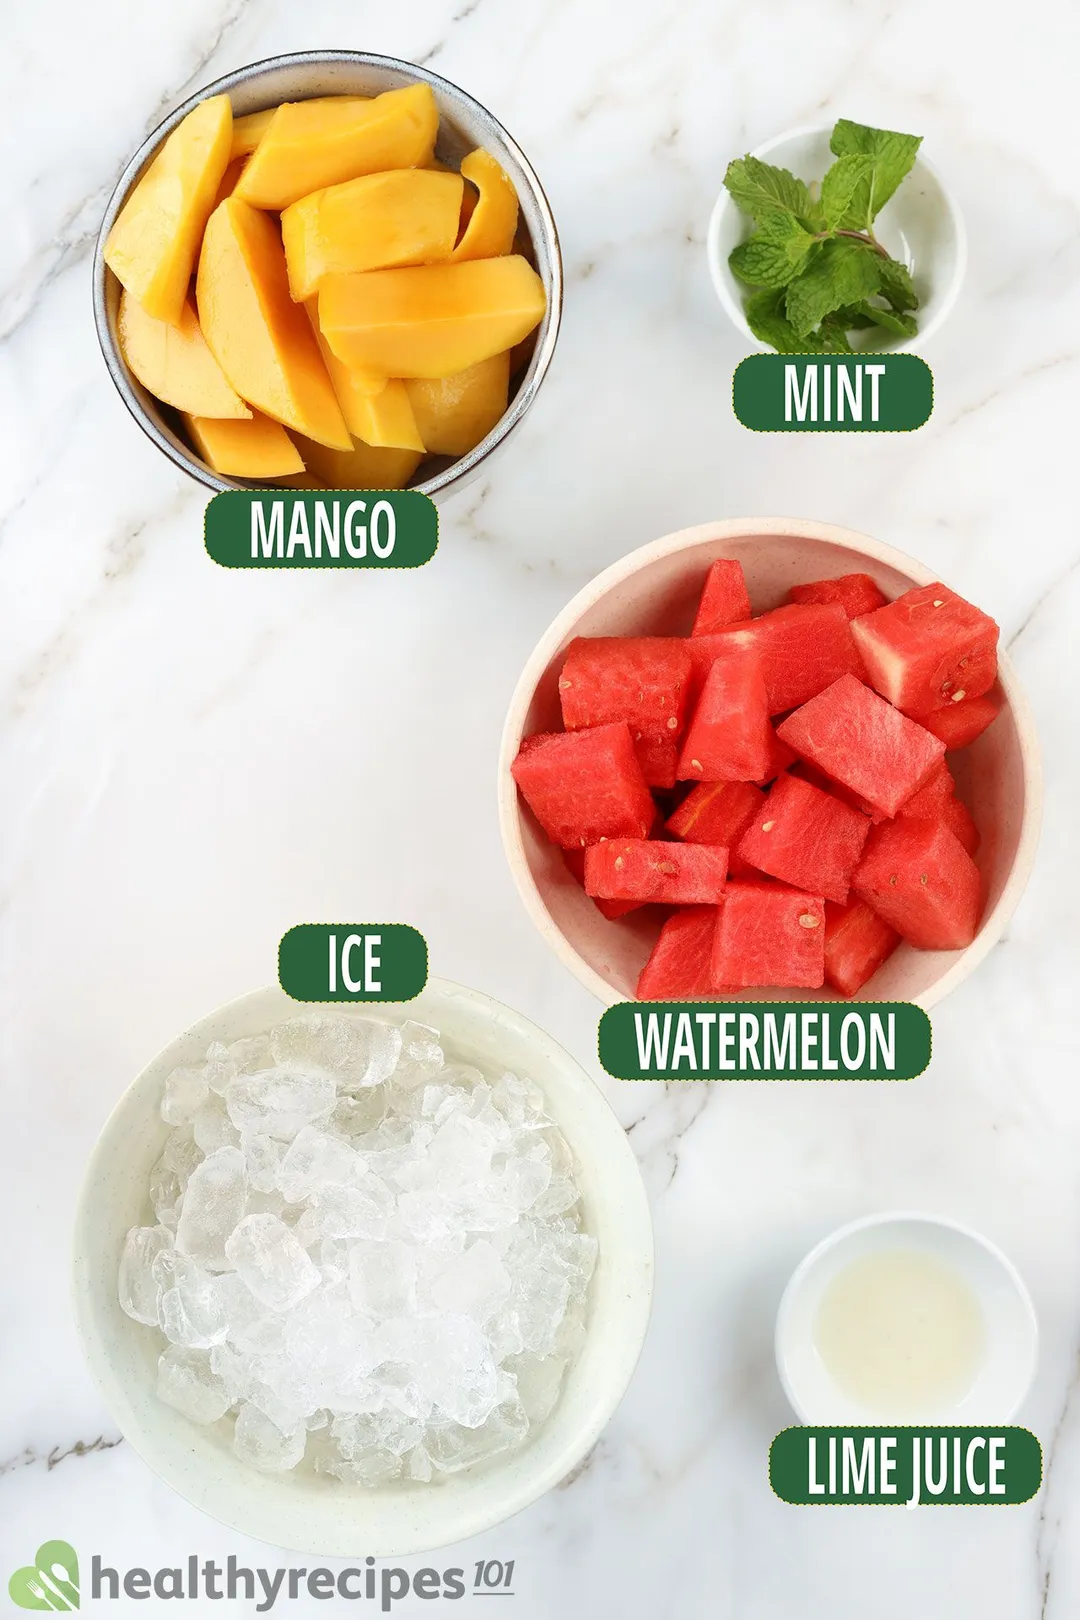 Ingredients for Mango Watermelon Smoothie, including bowls of watermelon triangles, mango wedges, mint leaves, ice, and lime juice.